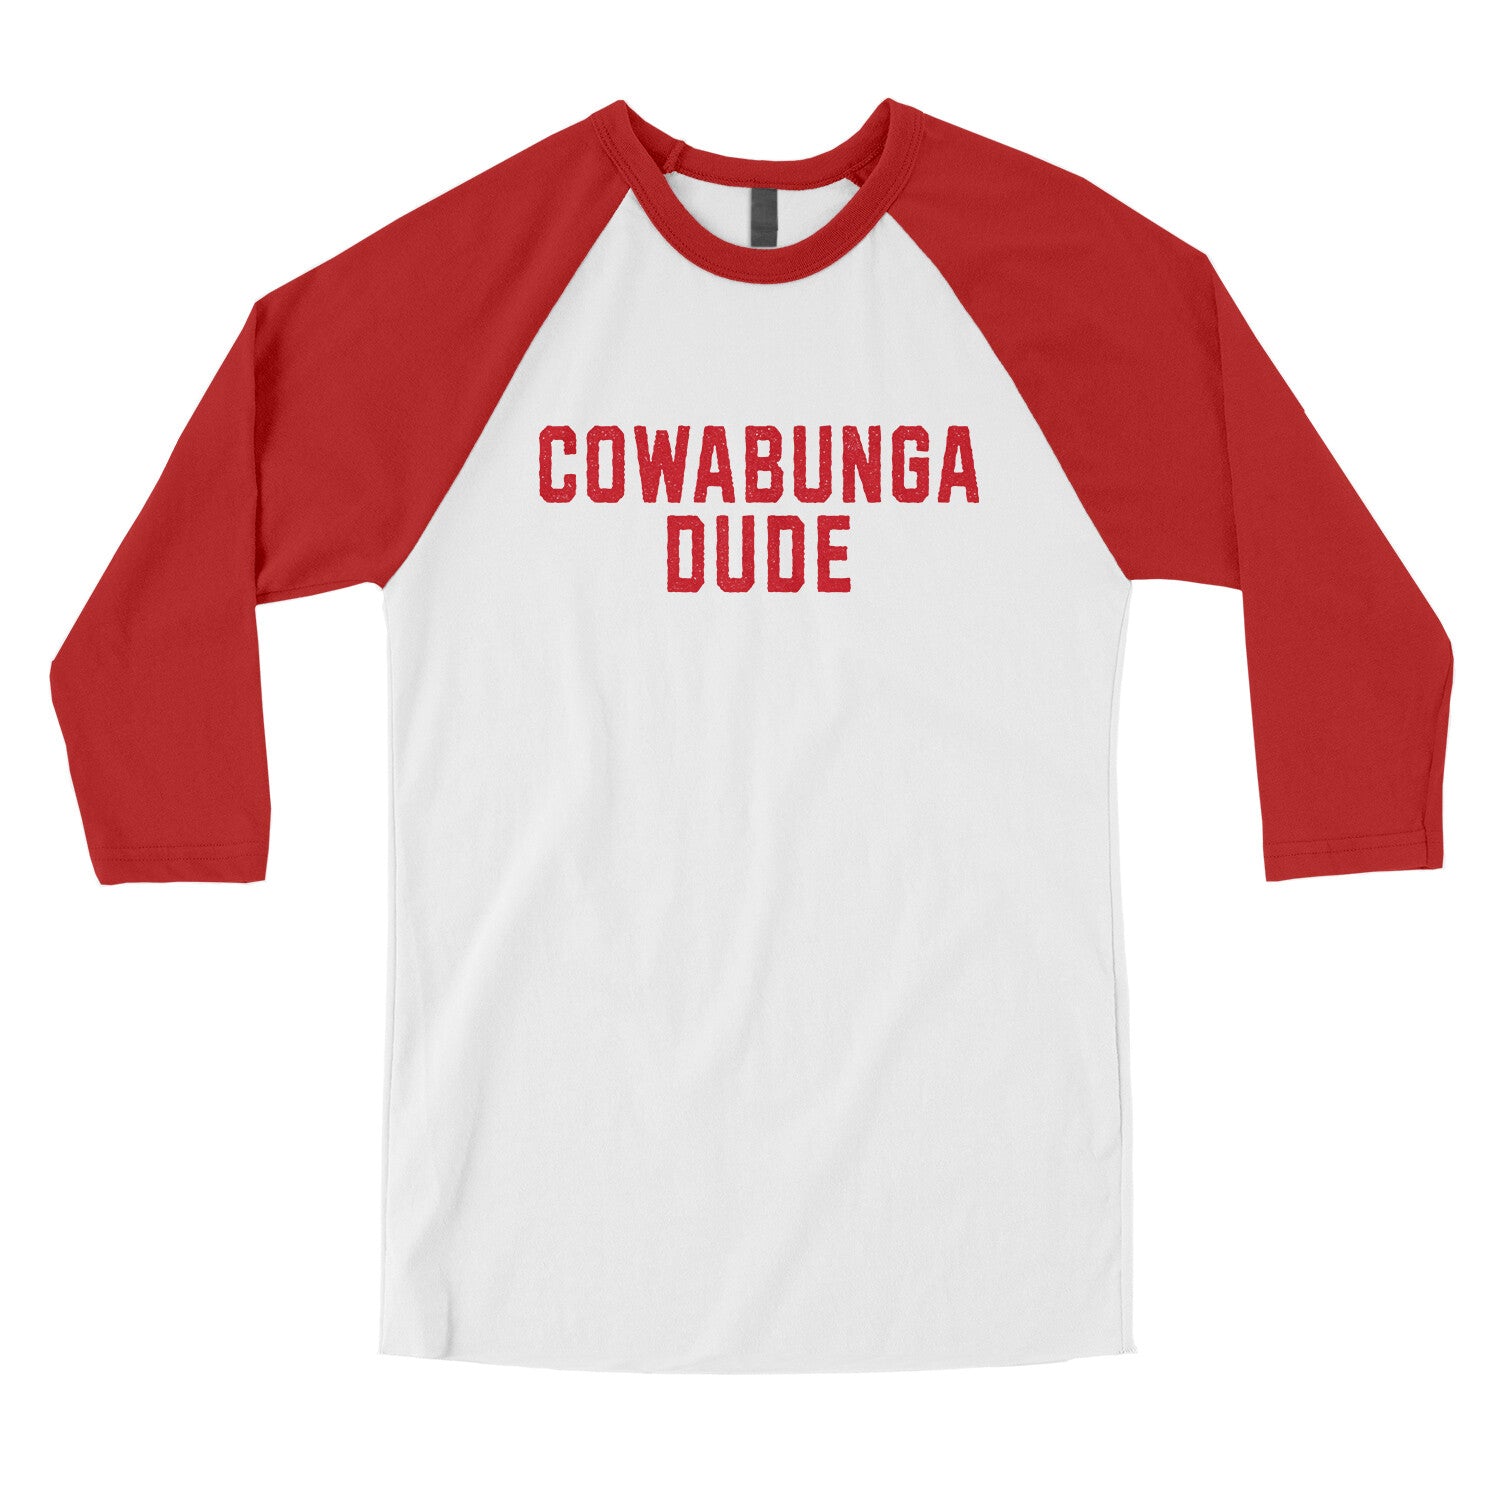 Cowabunga Dude in White with Red Color